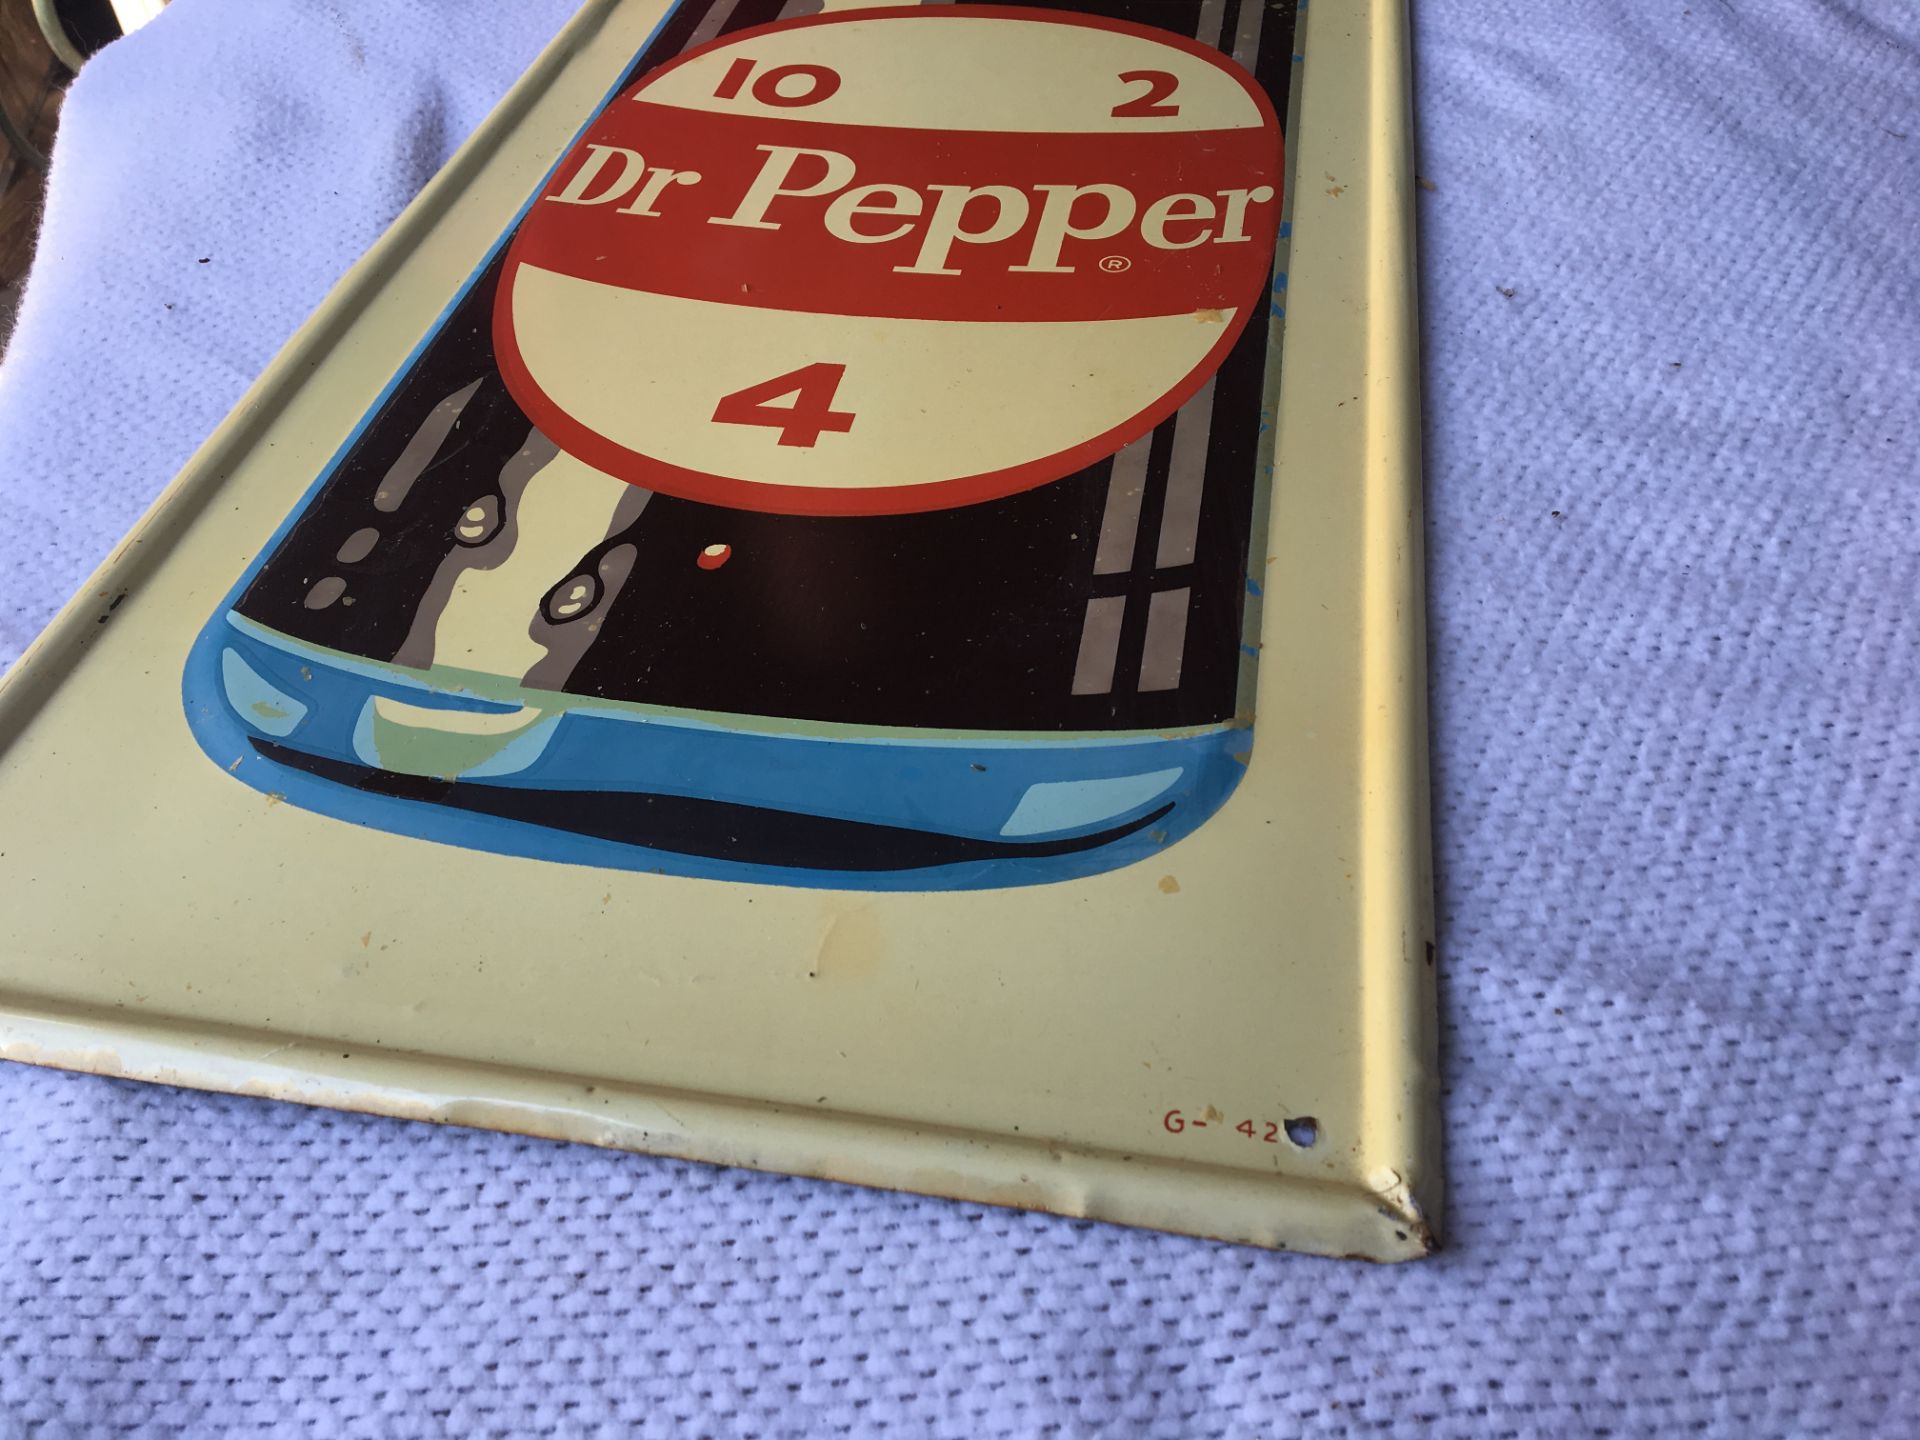 Dr. Pepper, 14” x 48”, Metal Sign (G-42) - Image 2 of 2